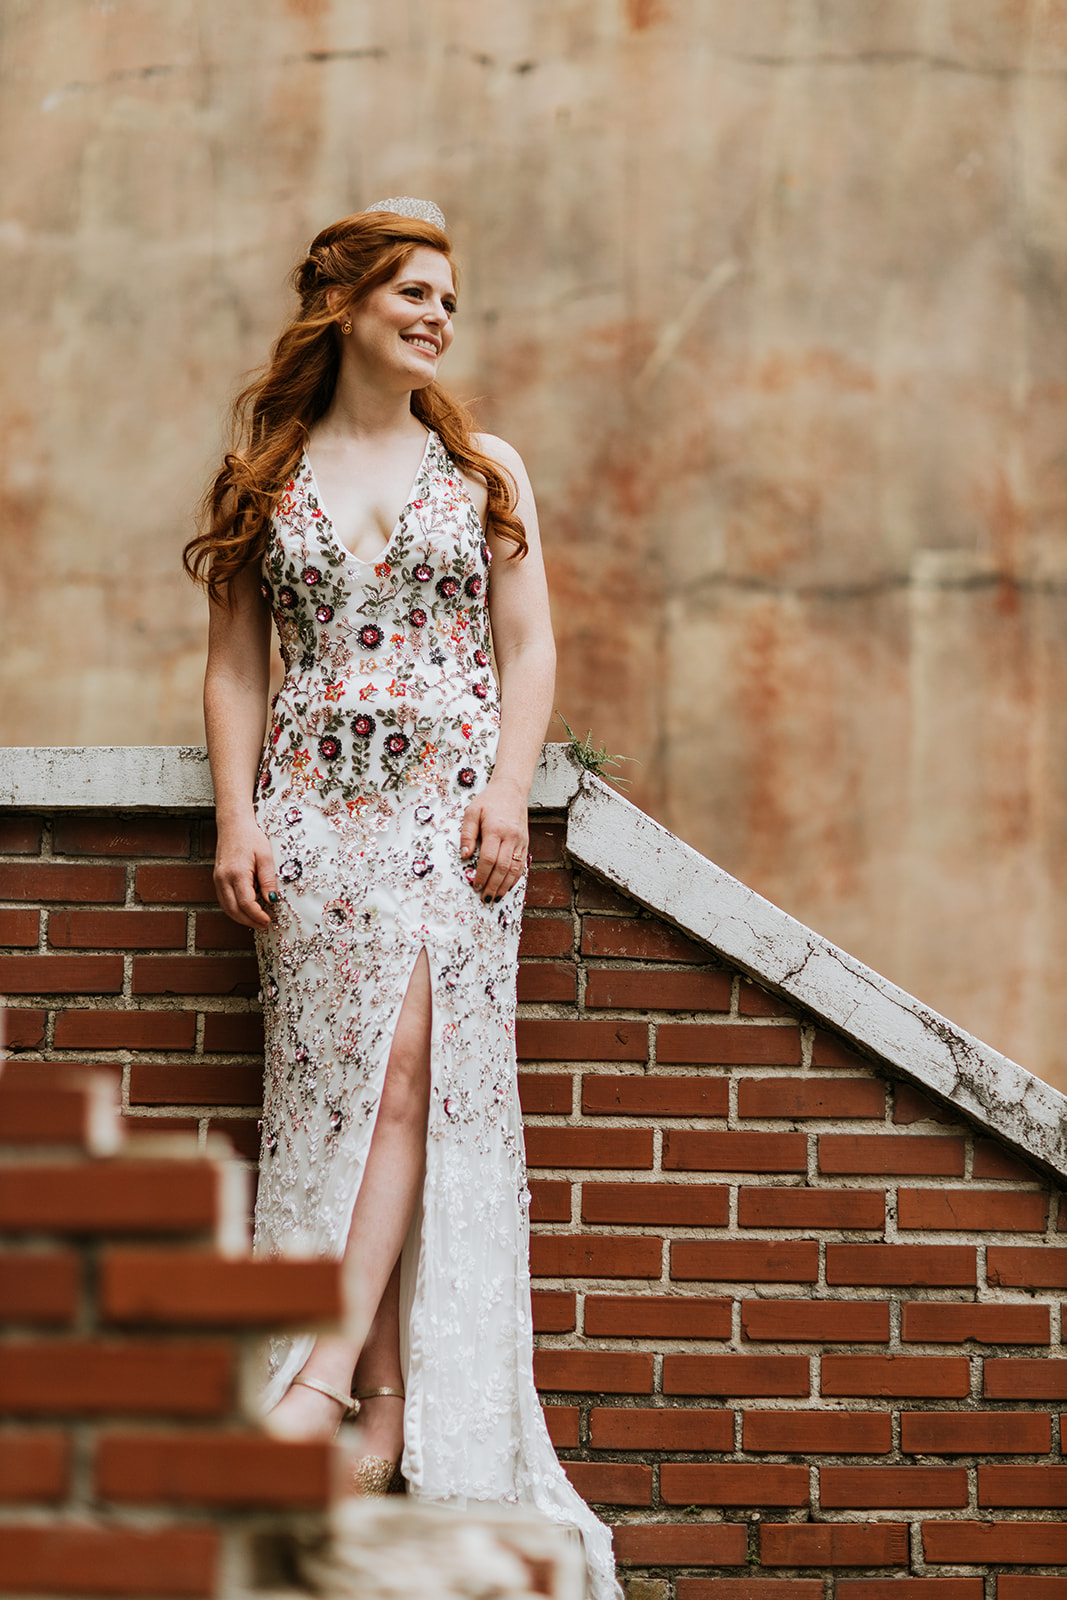 Bride glowing on her wedding day in floral wedding gown